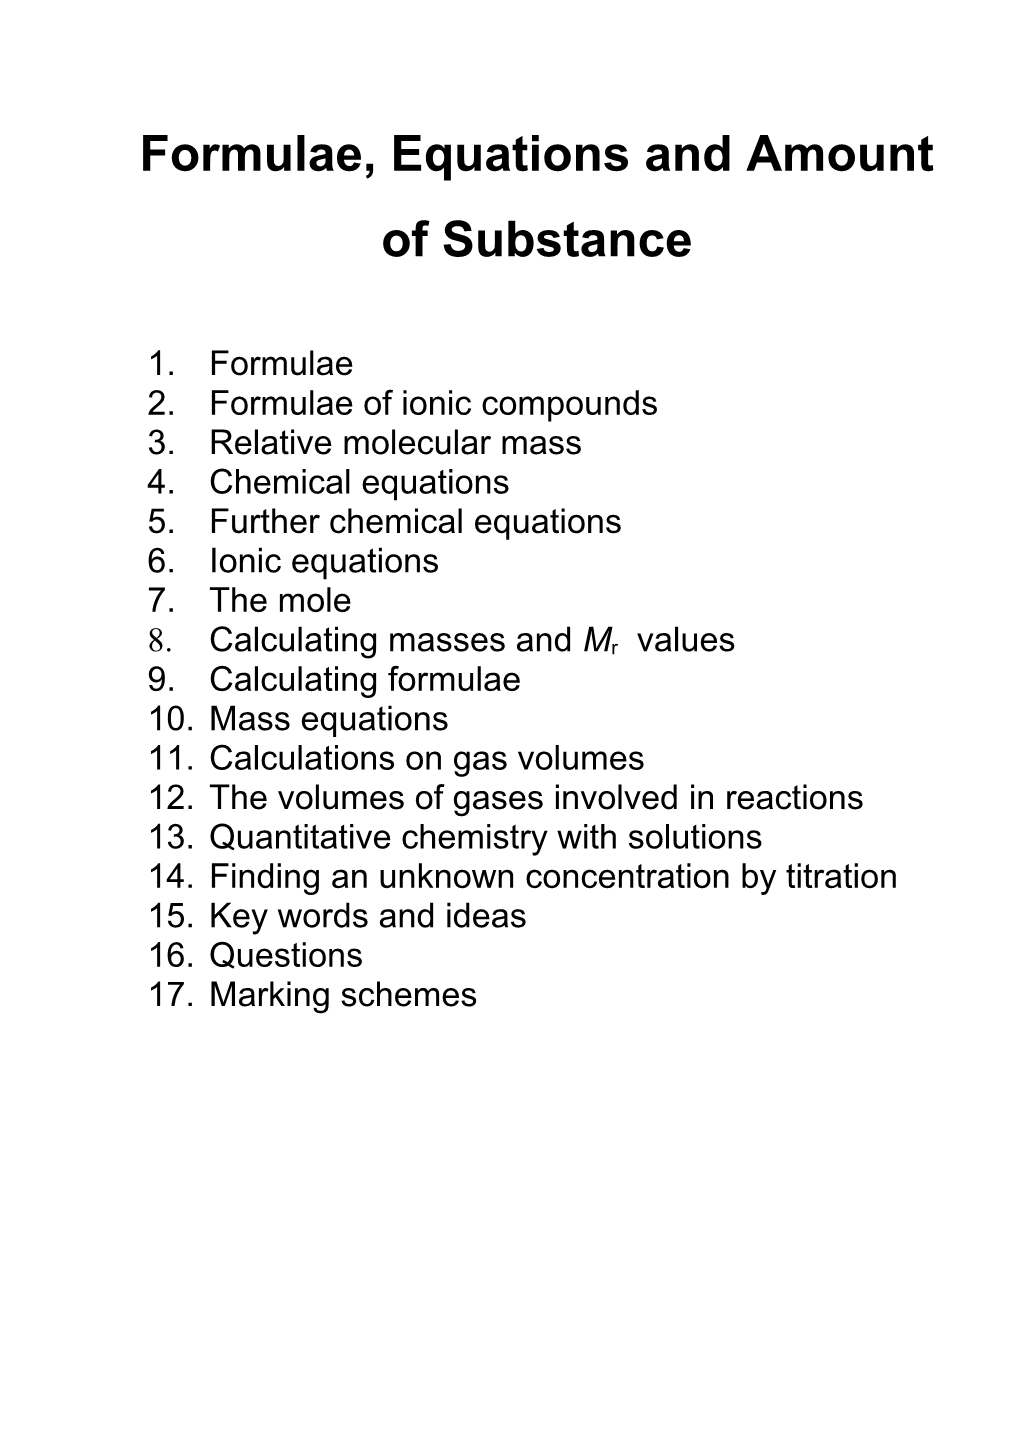 Formulae, Equations and Amount of Substance